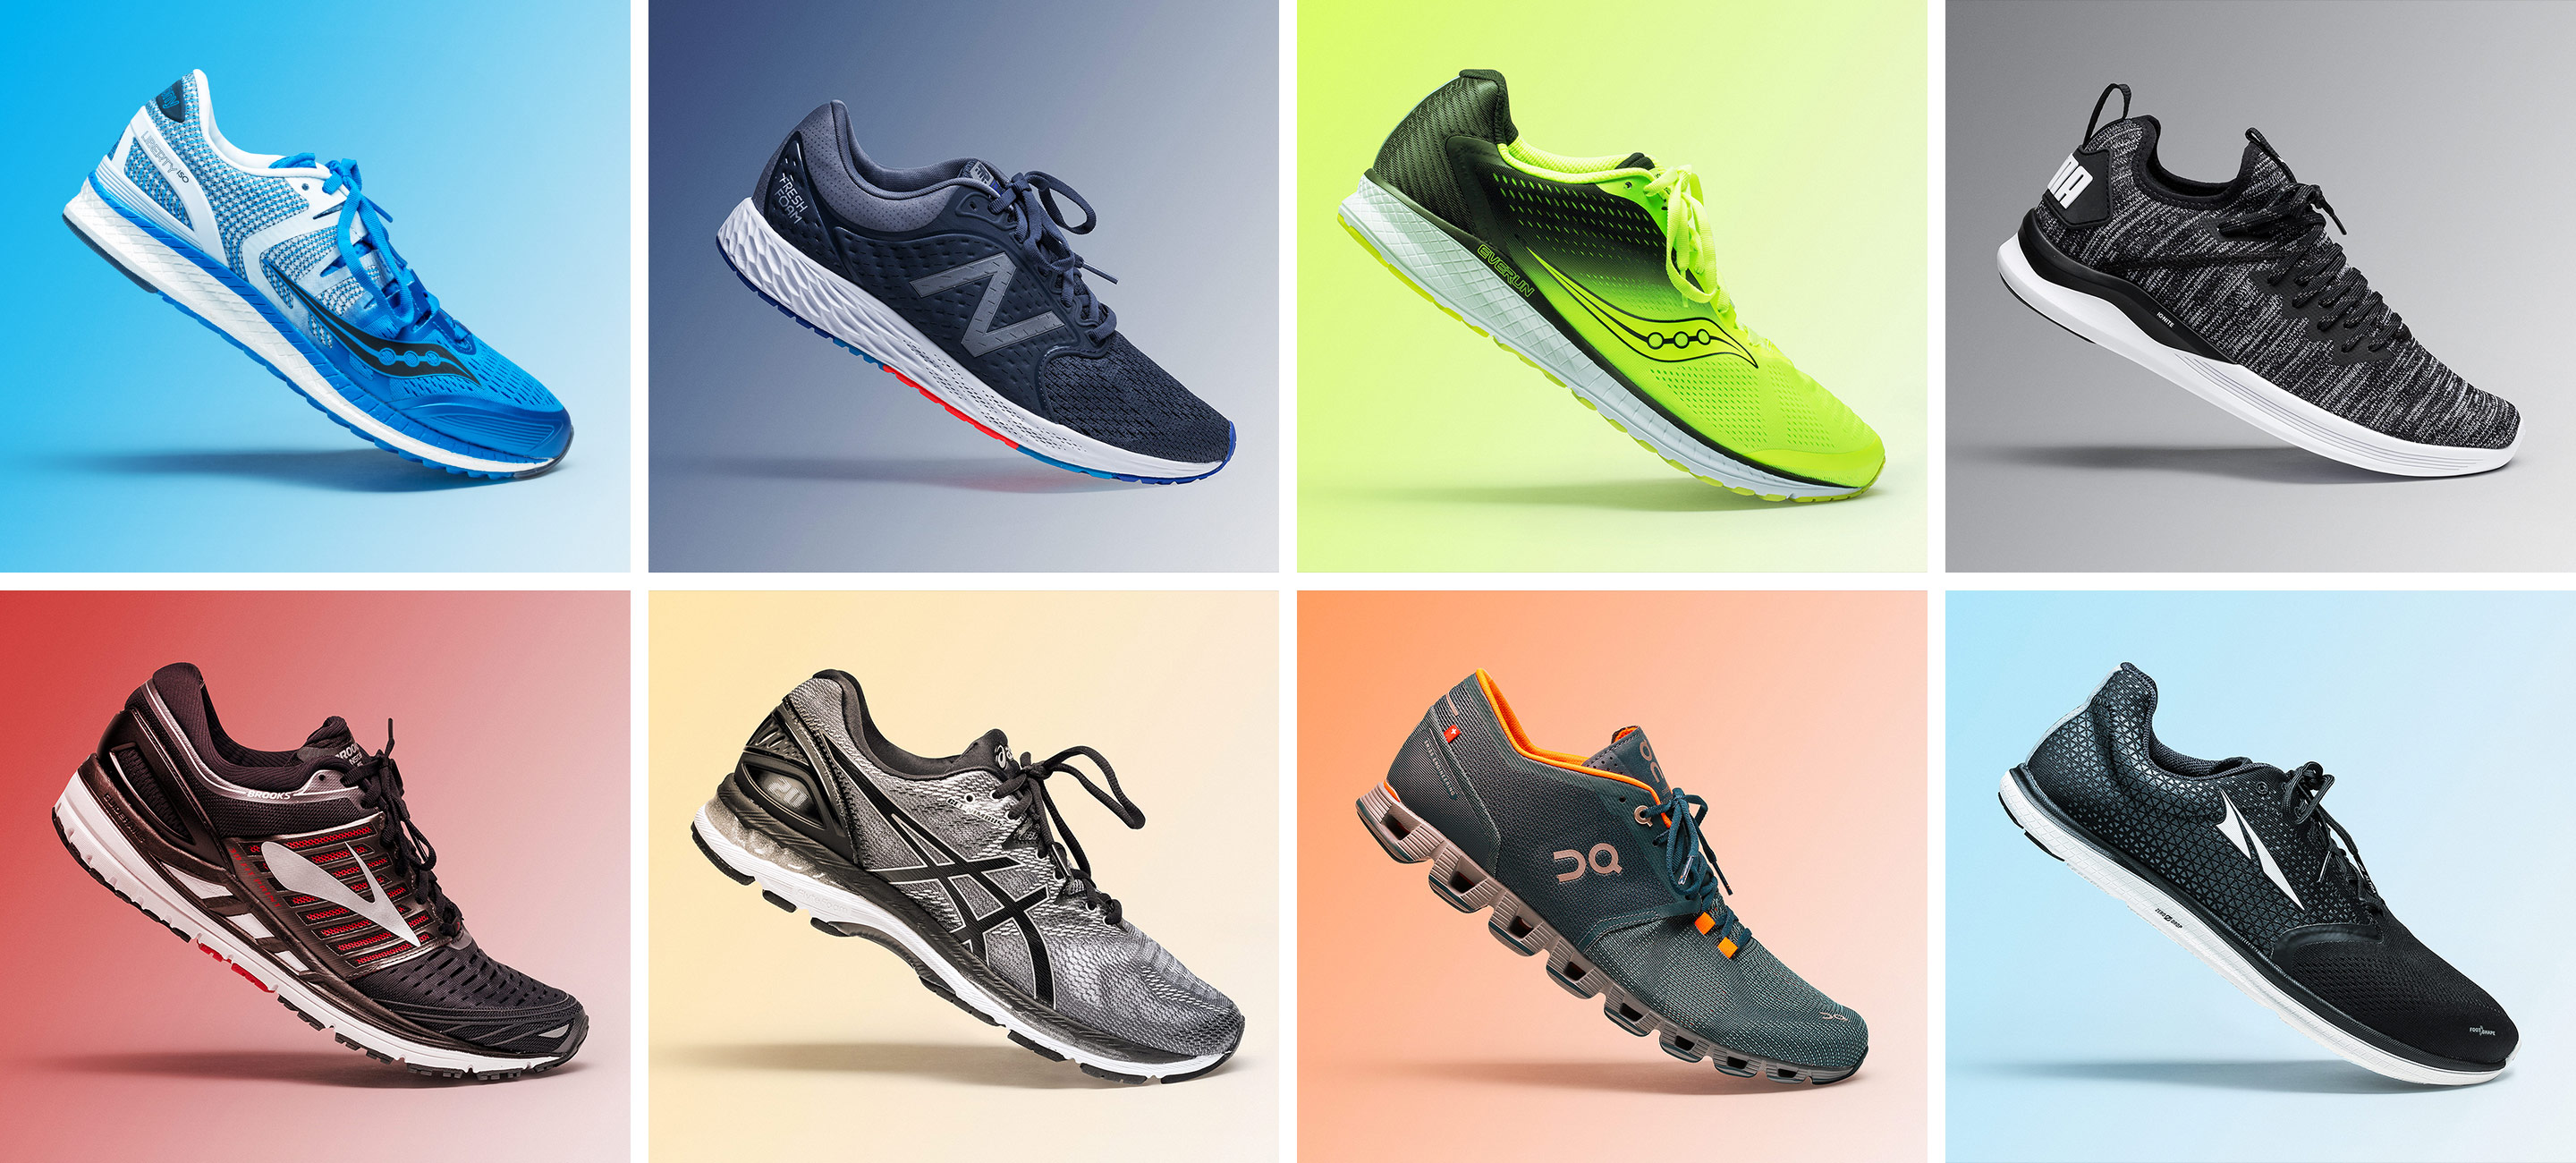 The 12 Best New Running Shoes in 2018 • Gear Patrol